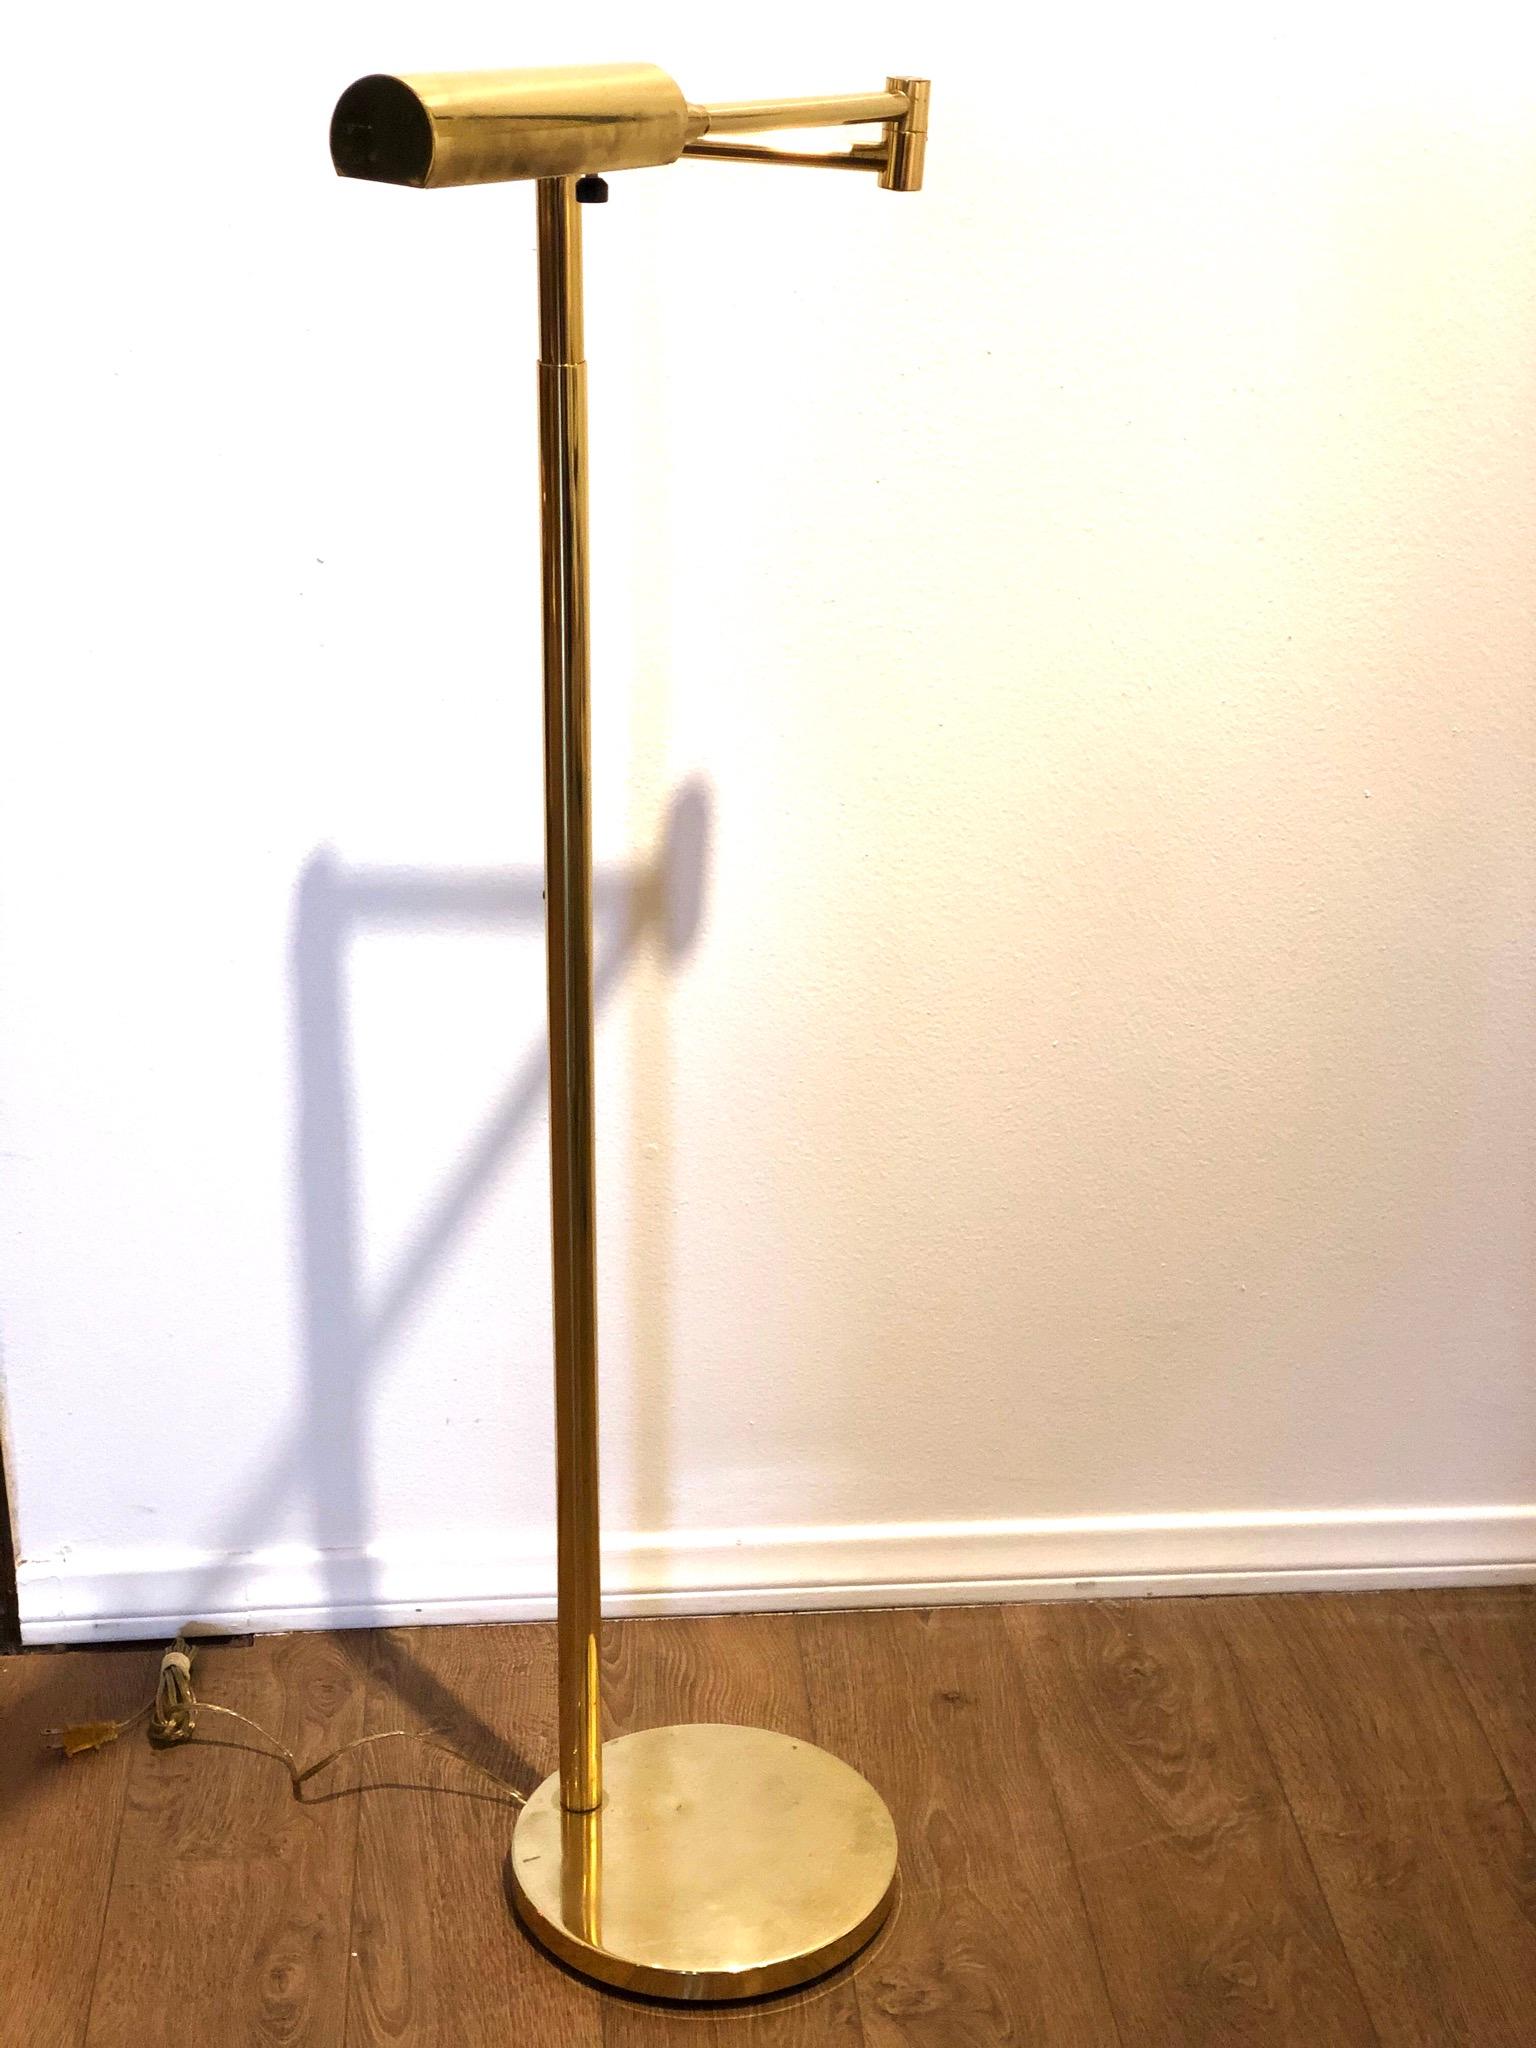 Simple and elegant design on this polished brass floor lamp , with dimmer switch by Koch & Lowy circa 1980s the pole moves up and down, from 41' to 51